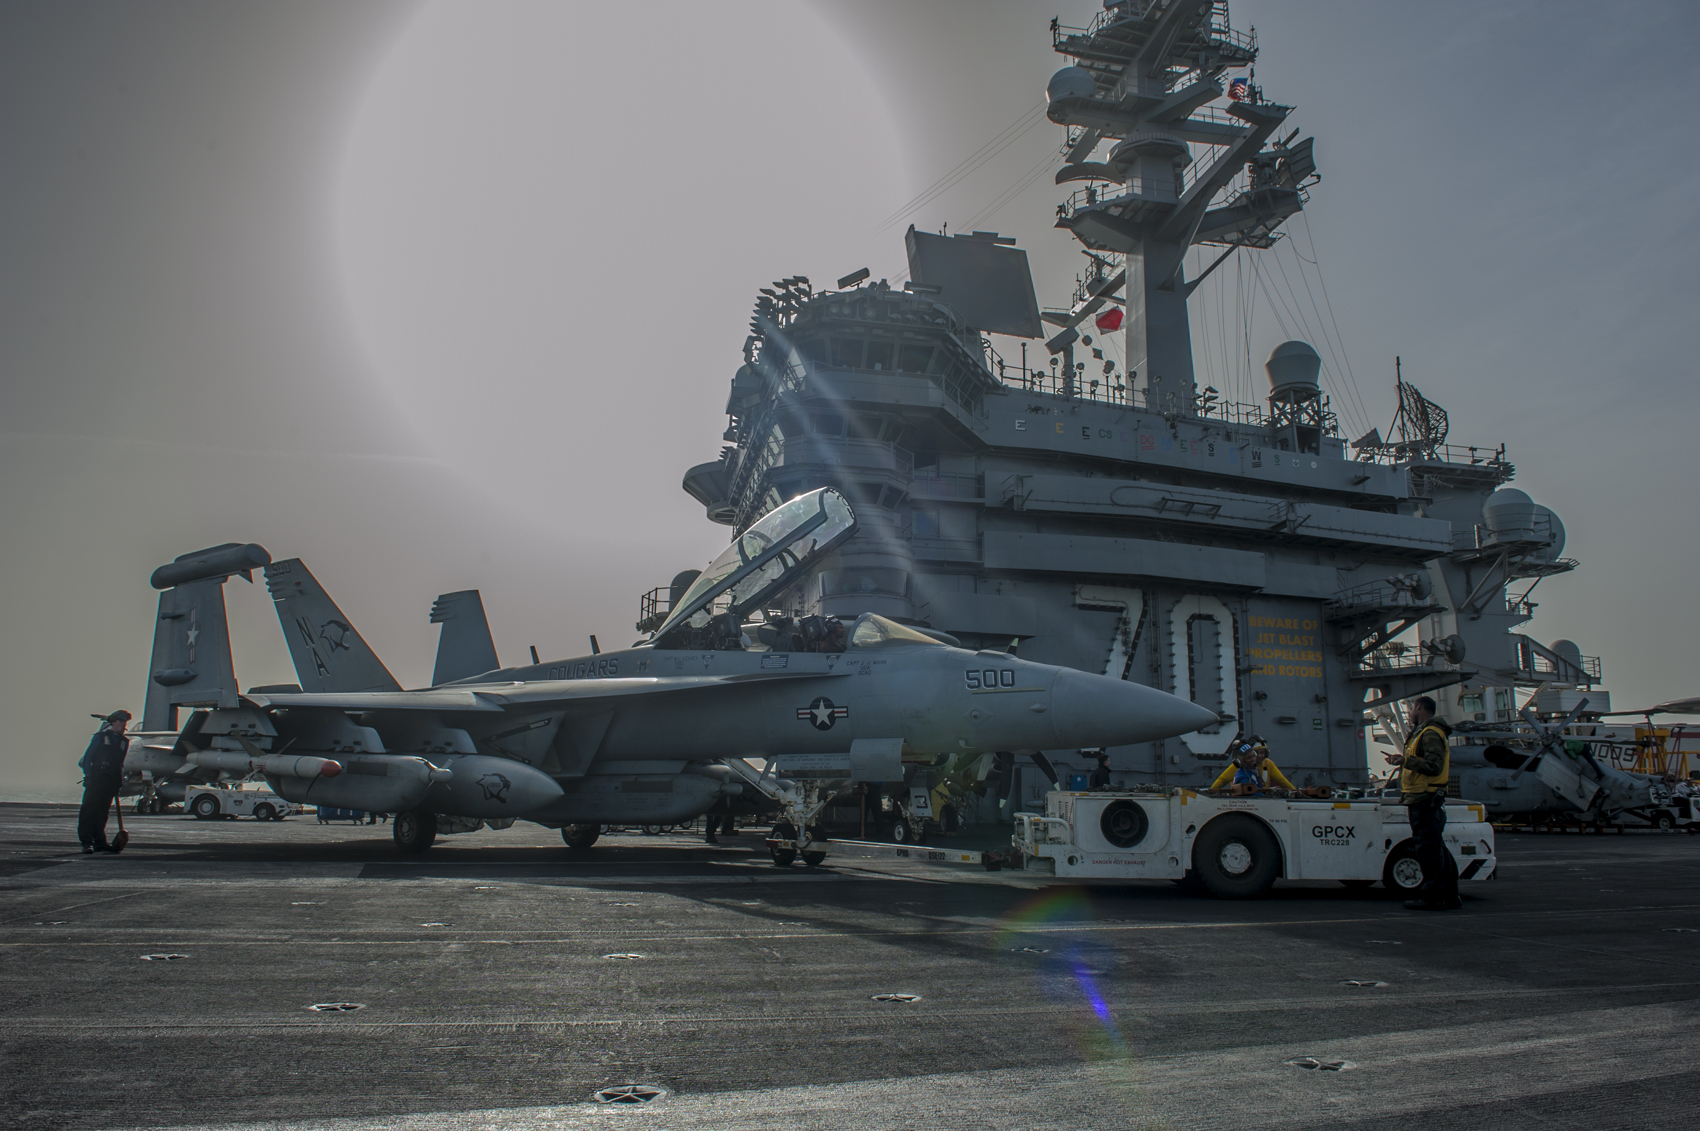 an EA-18G Growler from the Cougars of Electronic Attack Squadron (VAQ) 139 on the flight deck of the Nimitz-class aircraft carrier USS Carl Vinson (CVN 70).